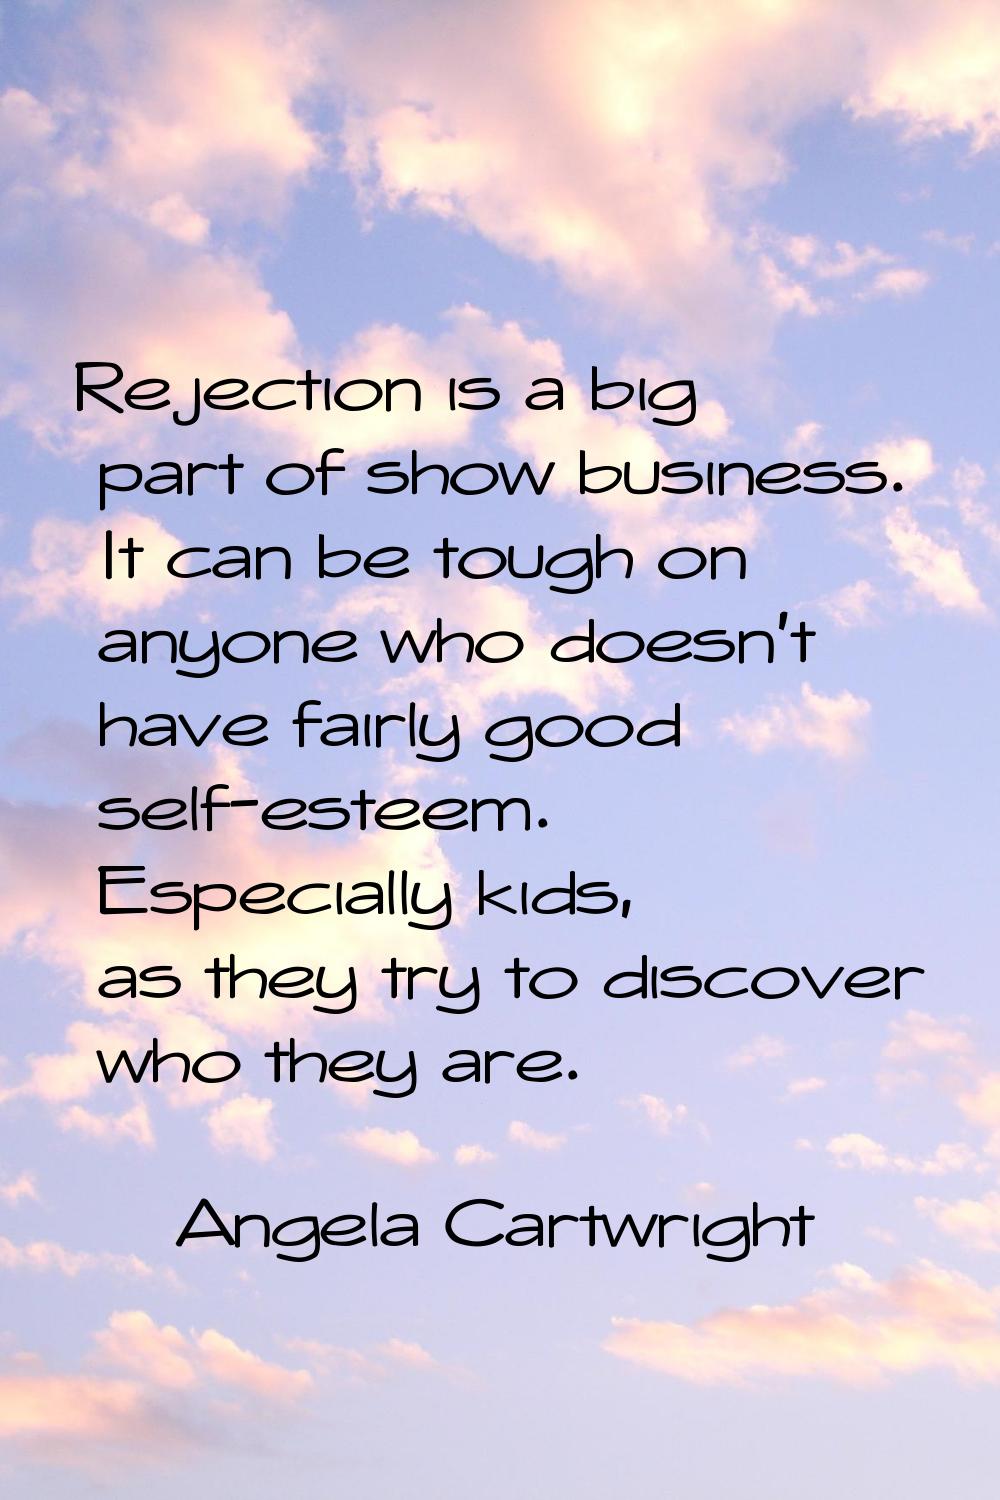 Rejection is a big part of show business. It can be tough on anyone who doesn't have fairly good se